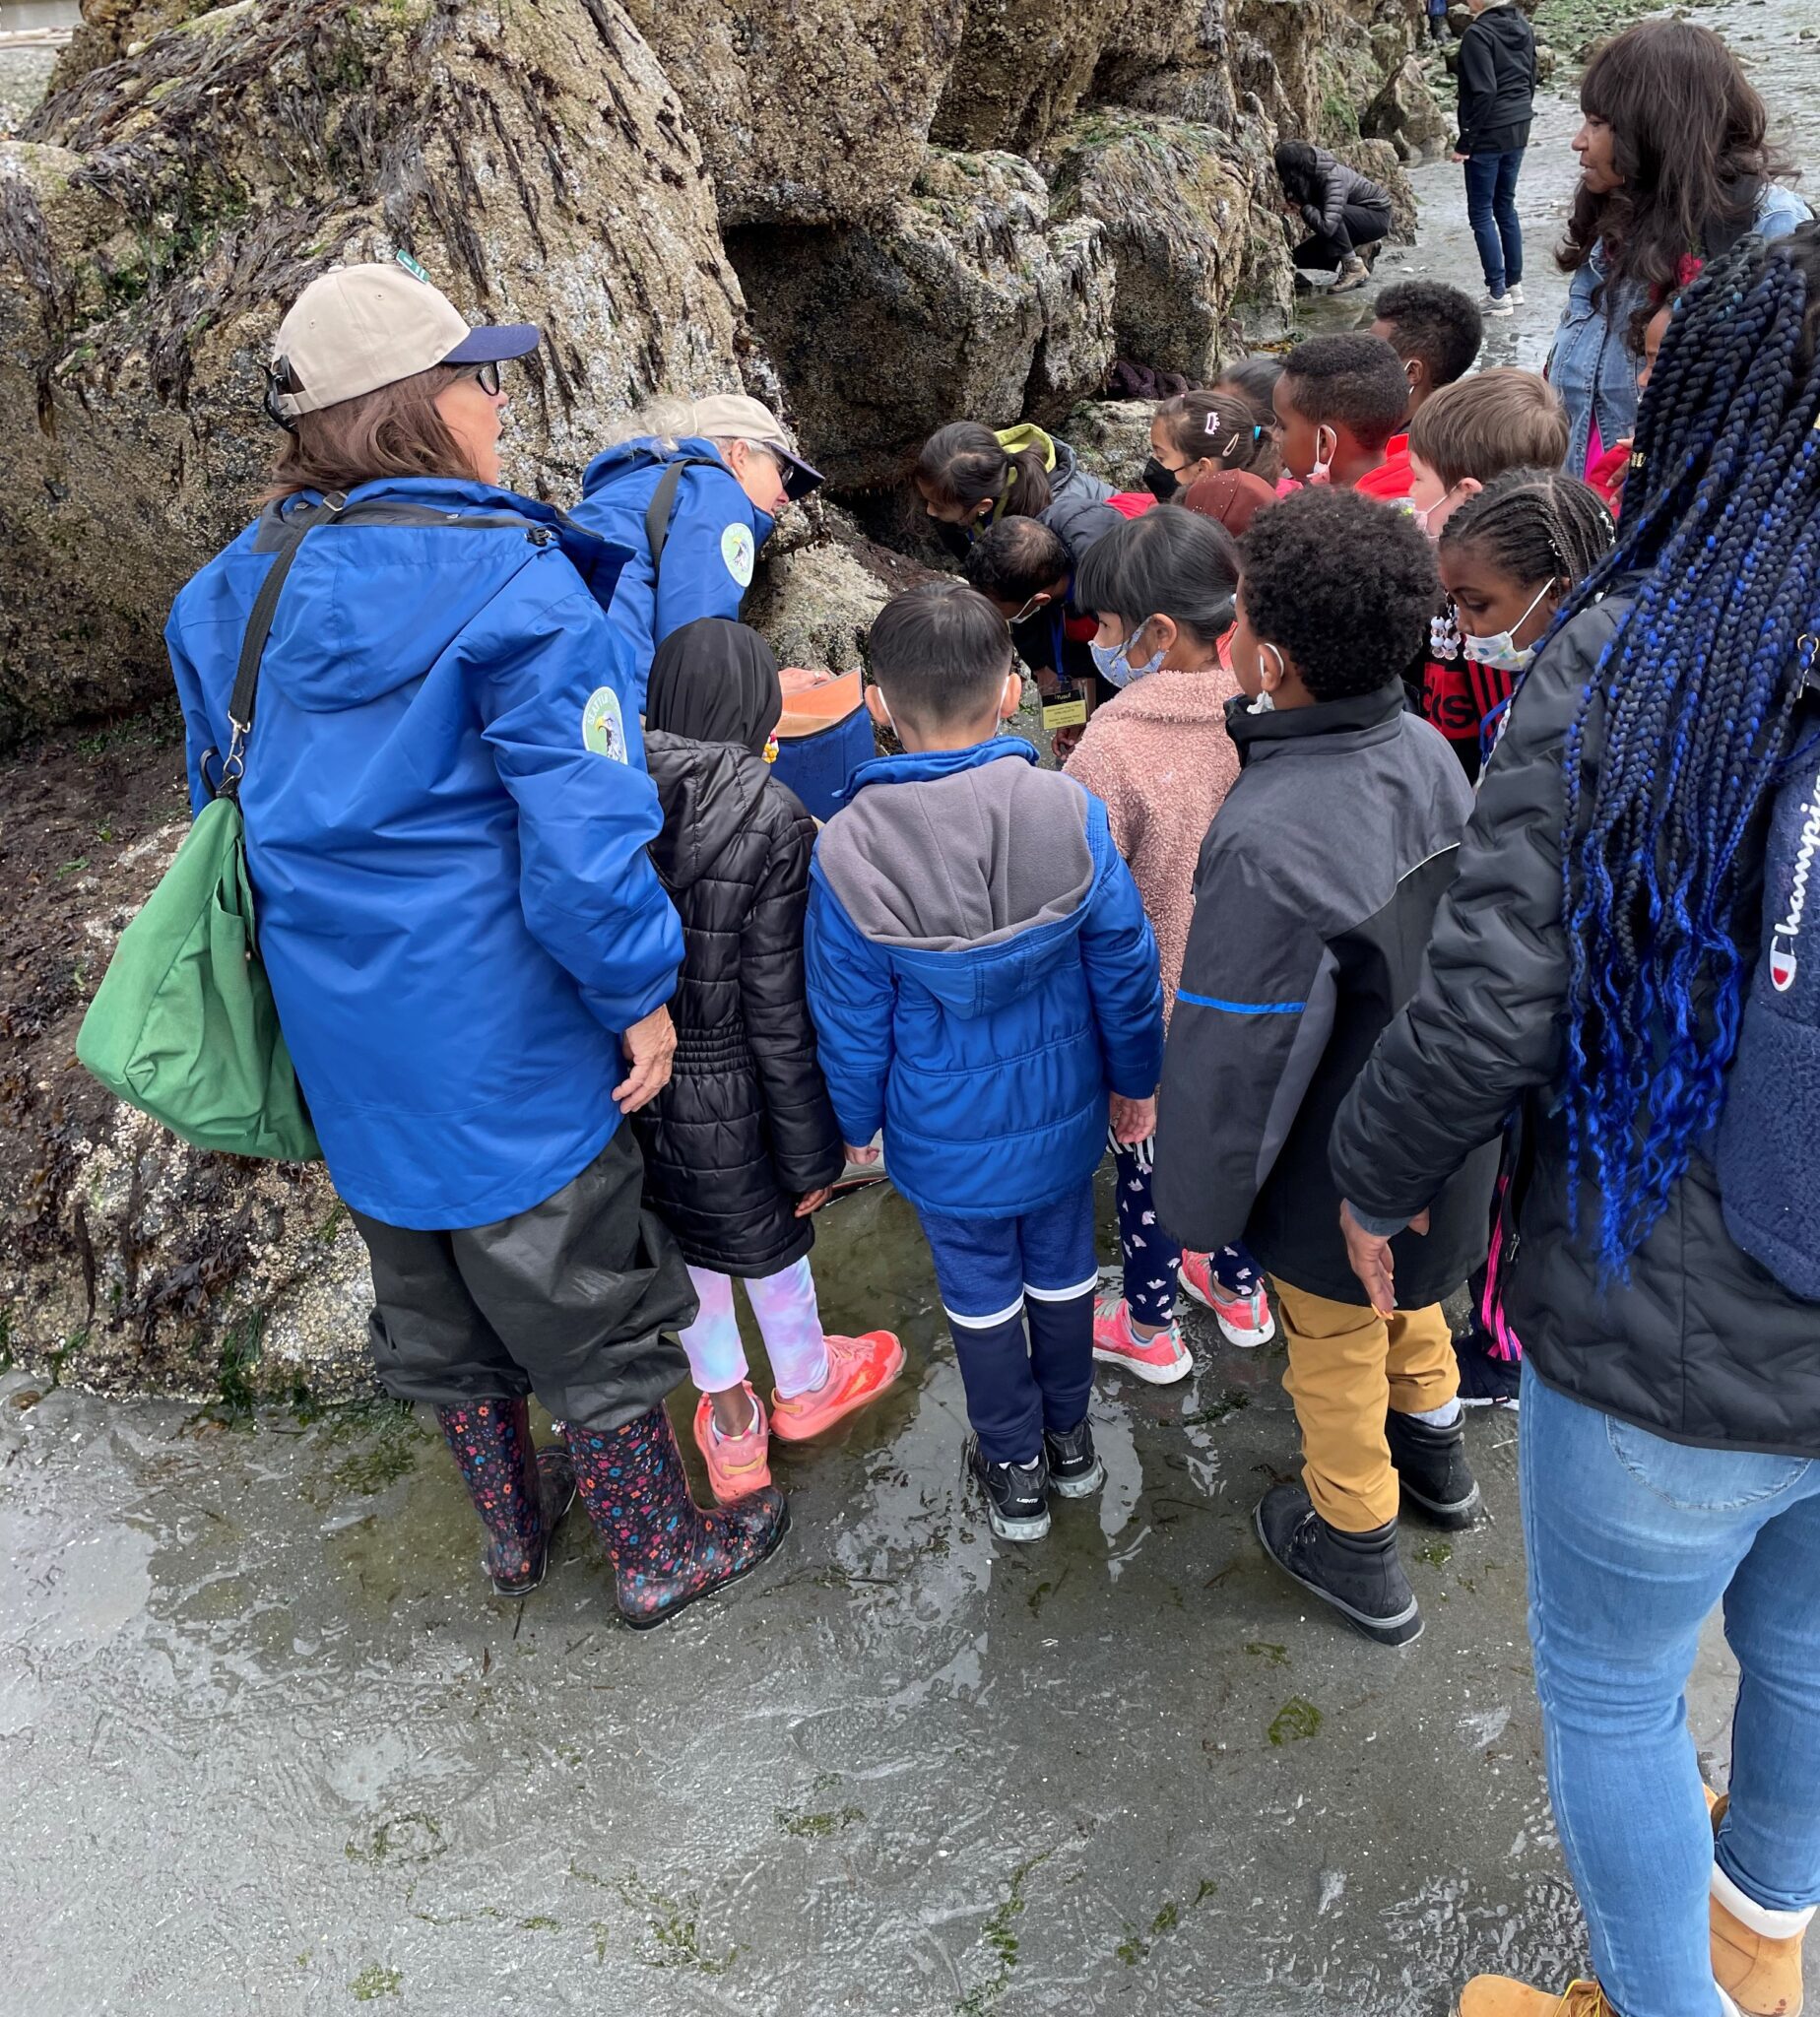 Group of kids outdoors on the beach exploring the tide pools with a naturalist guide.